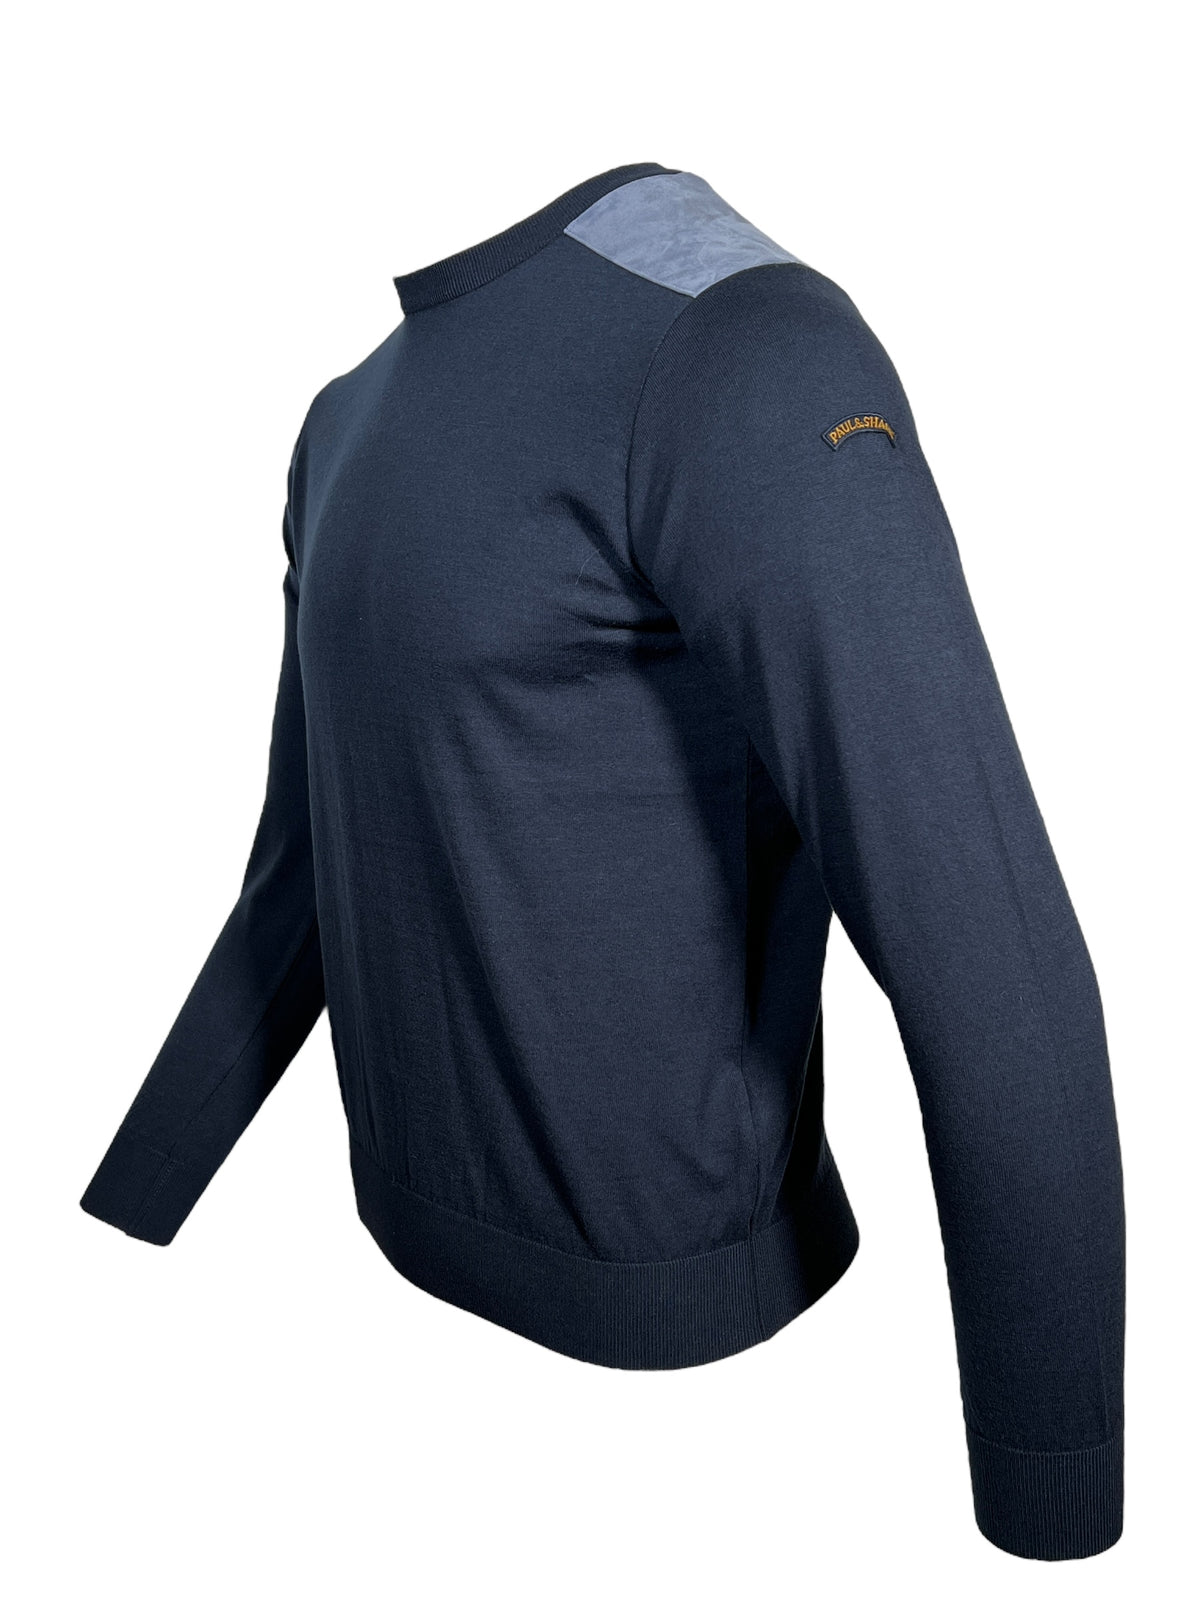 PAUL & SHARK MEN'S CREW SWEATER WITH SUEDE DETAIL - BLUE